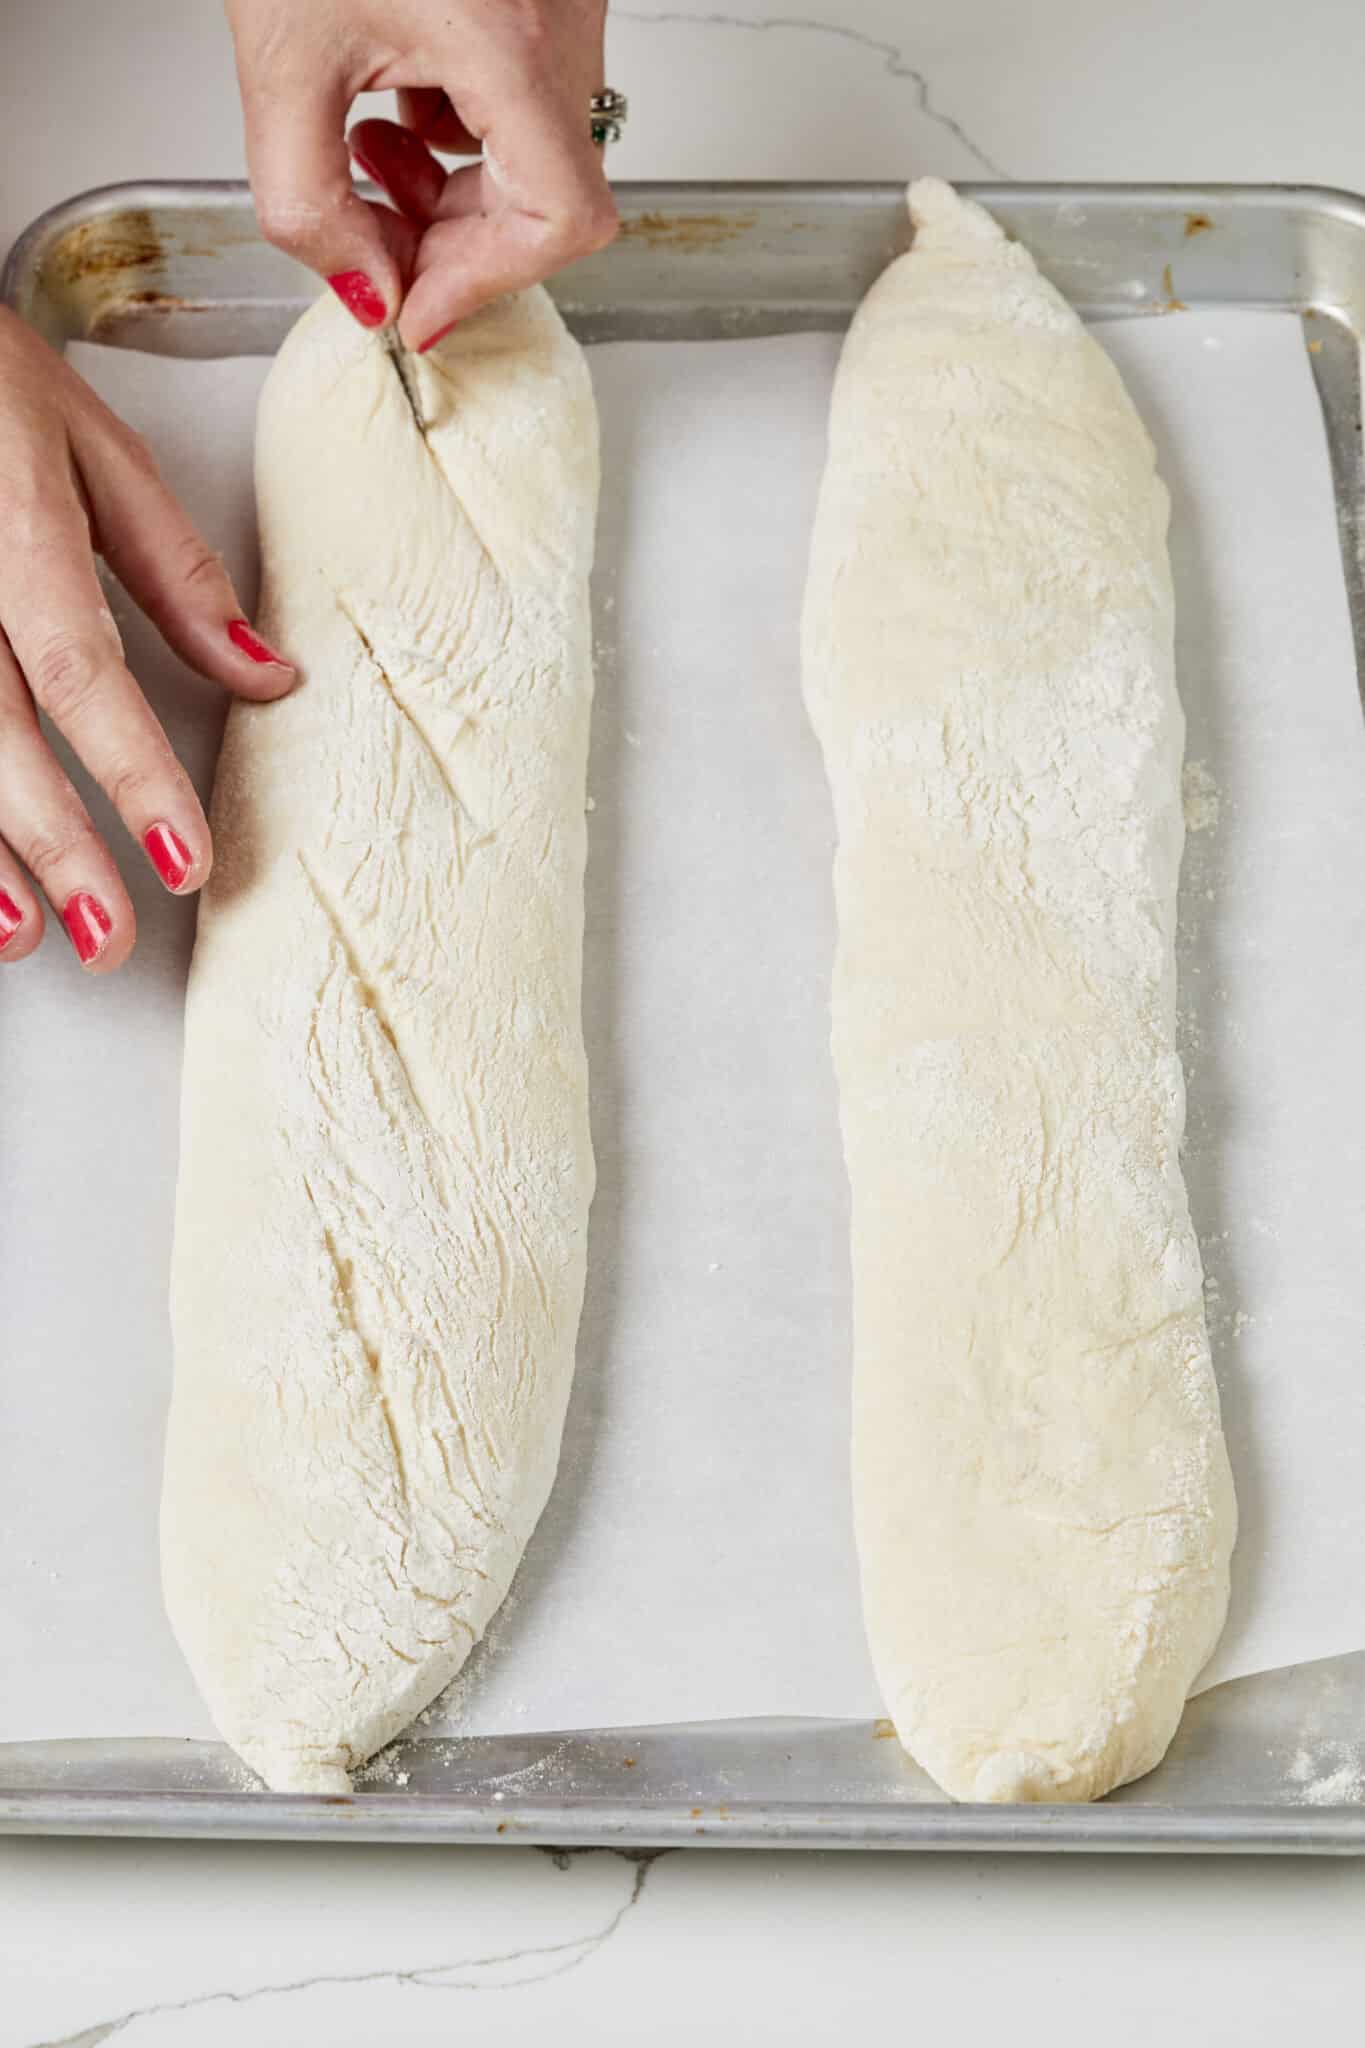 Scoring baguettes with a sharp blade before baking. 